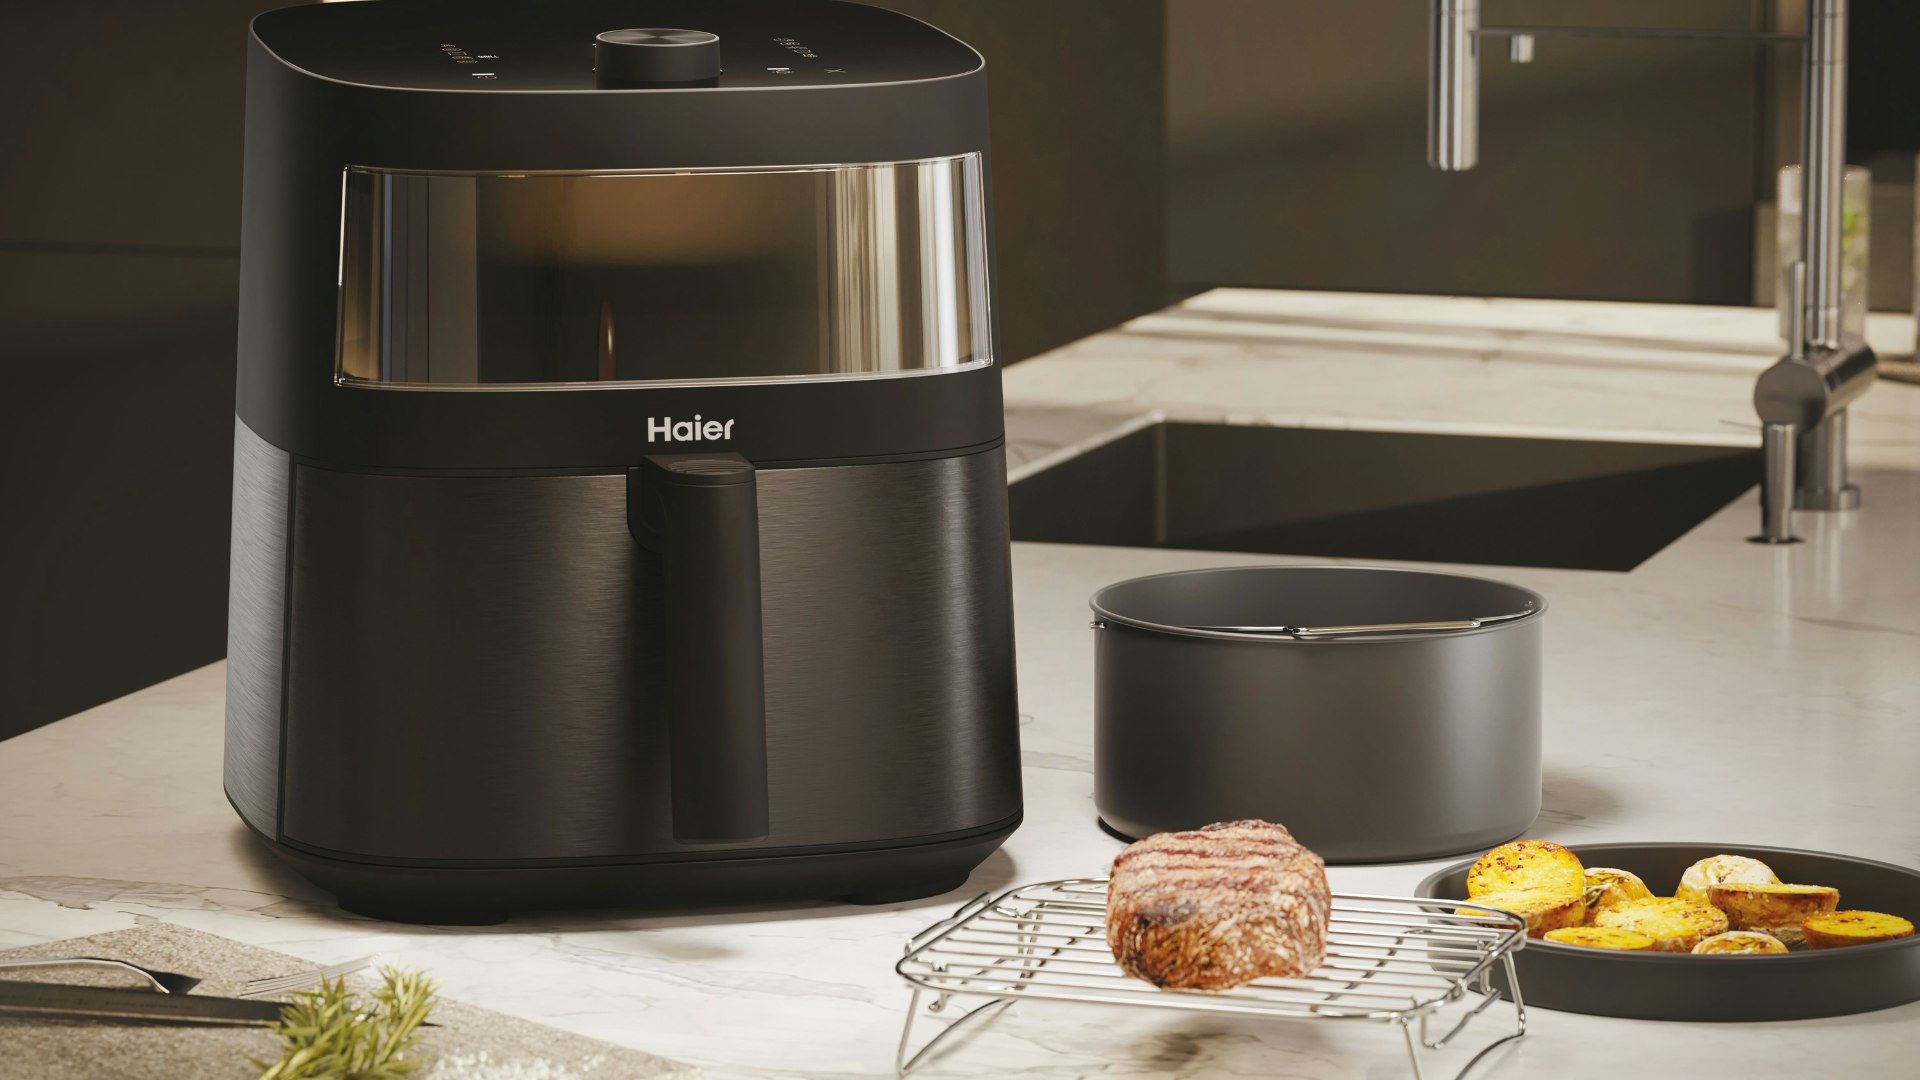 Tried and tested: Is Haier's new air fryer really worth the hype?